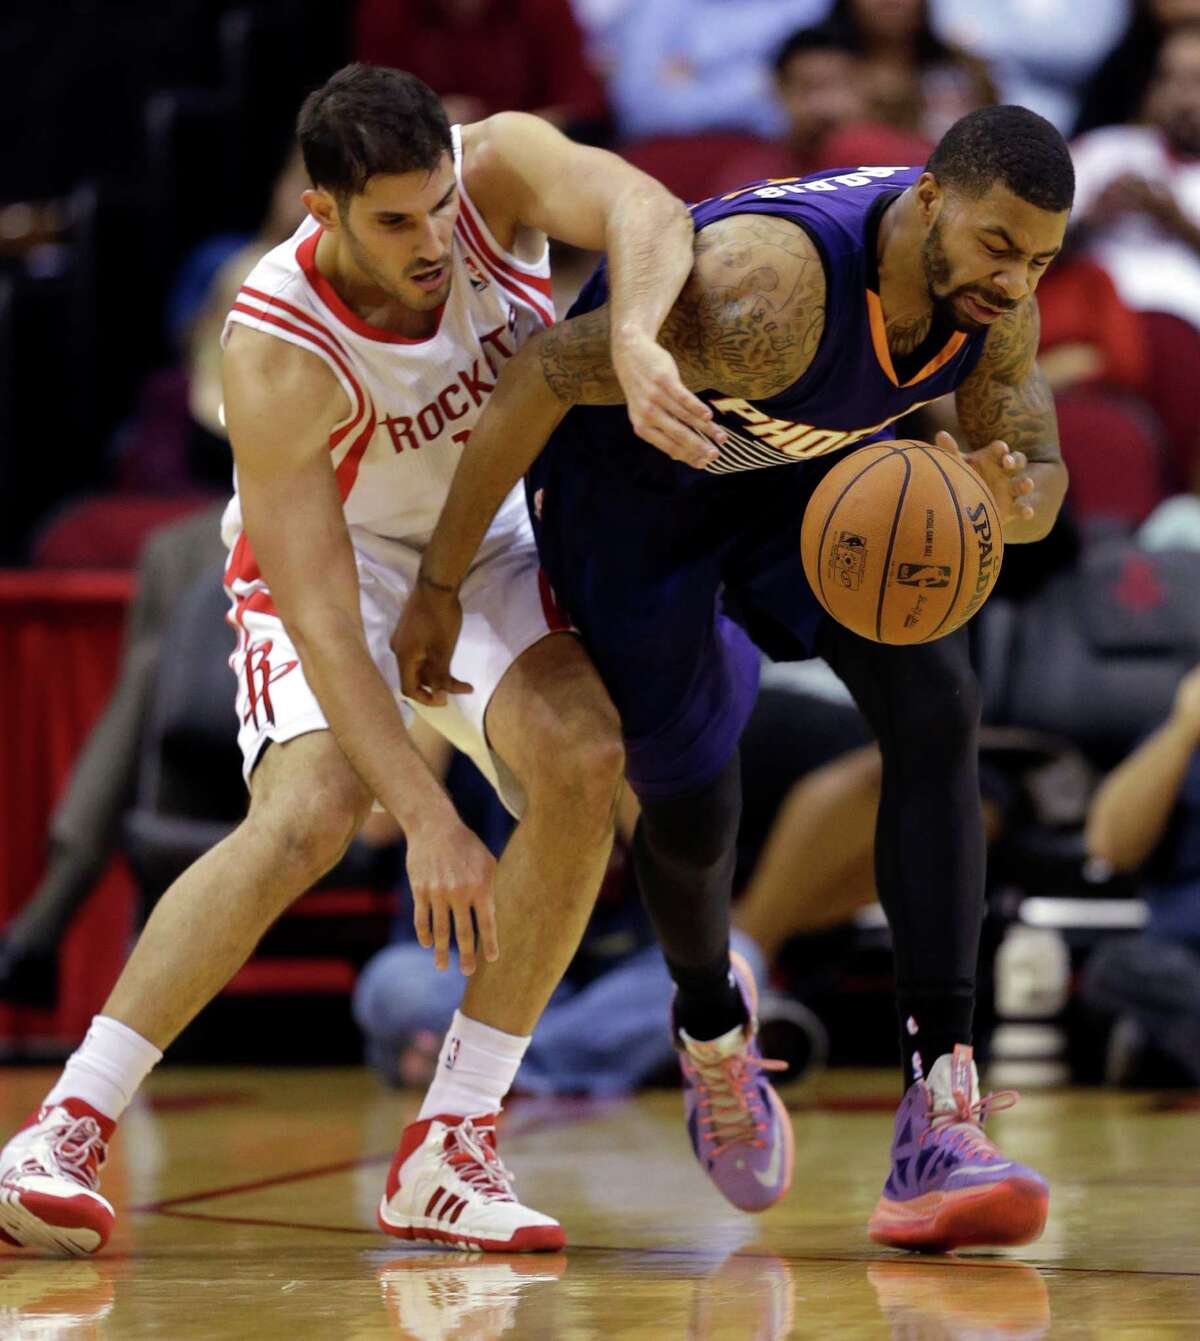 Phoenix Suns' Marcus Morris, right, steals the ball from Houston Rockets' Omri Casspi, left, during the second quarter of an NBA basketball game Wednesday, Dec. 4, 2013, in Houston. (AP Photo/David J. Phillip)